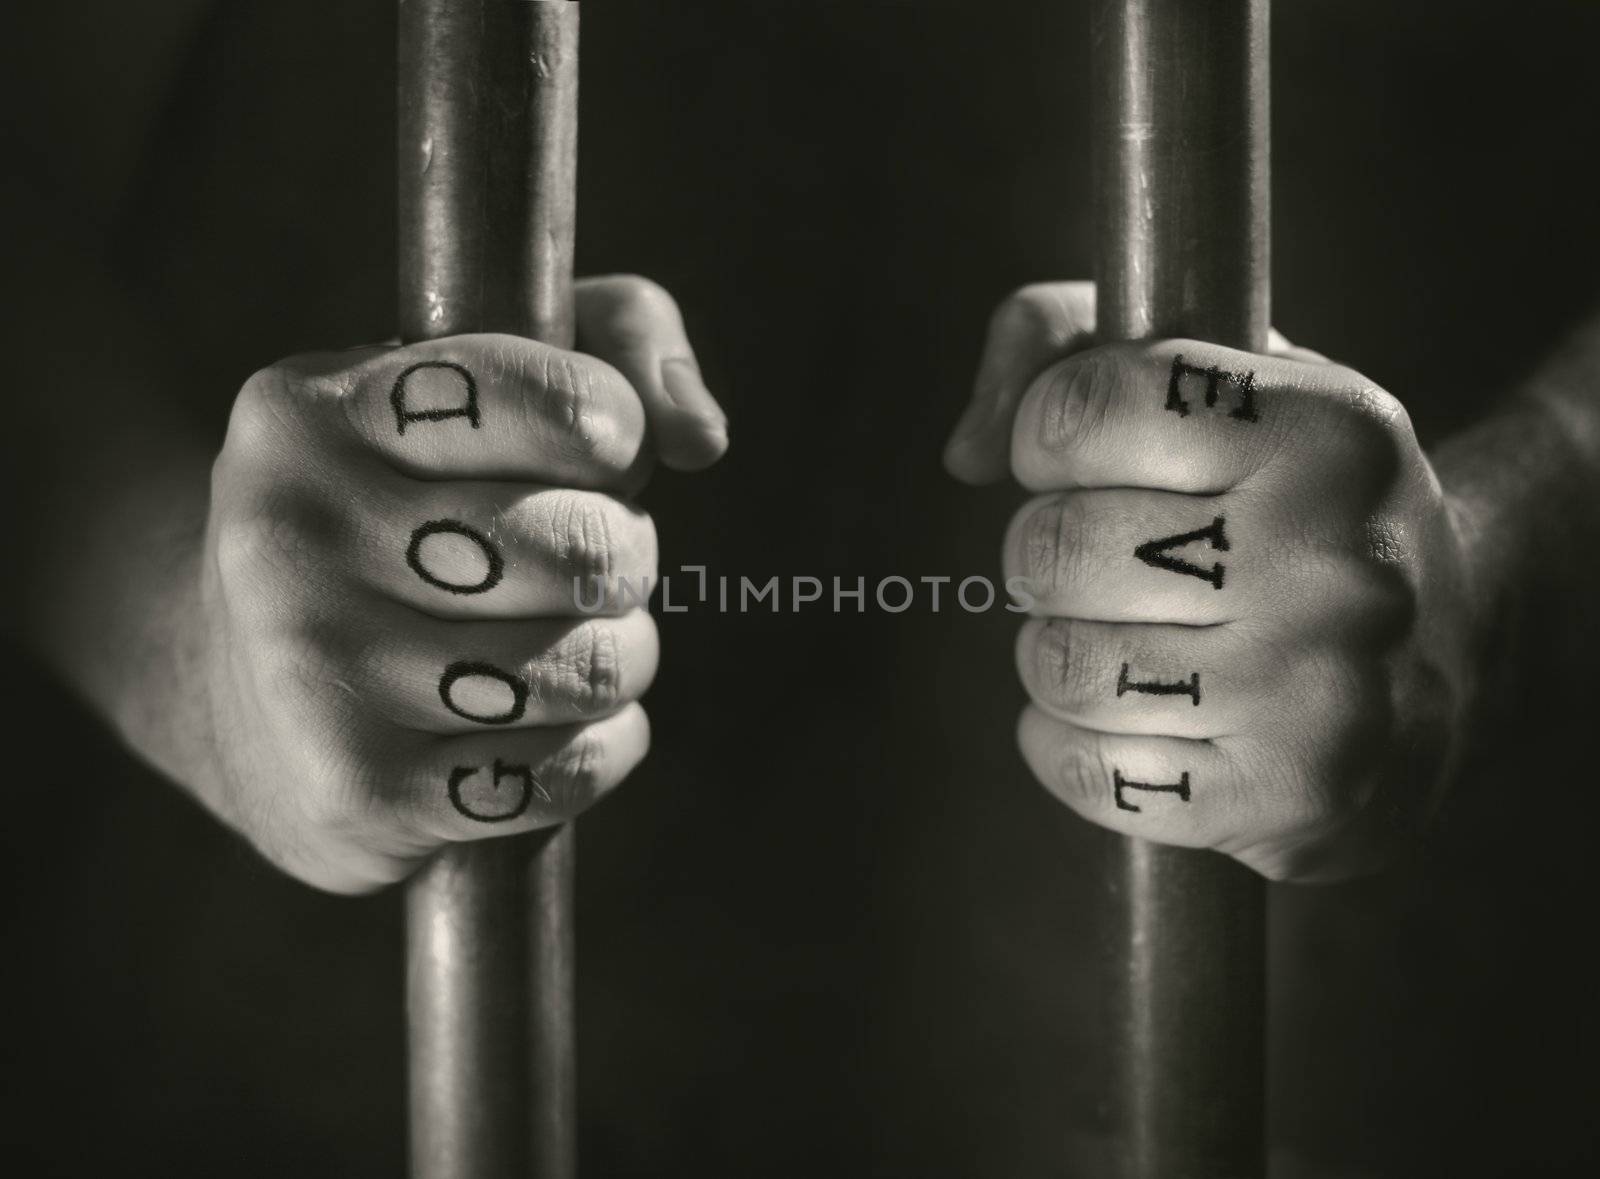 Man with (fake) Good and Evil tattoos behind prison bars.